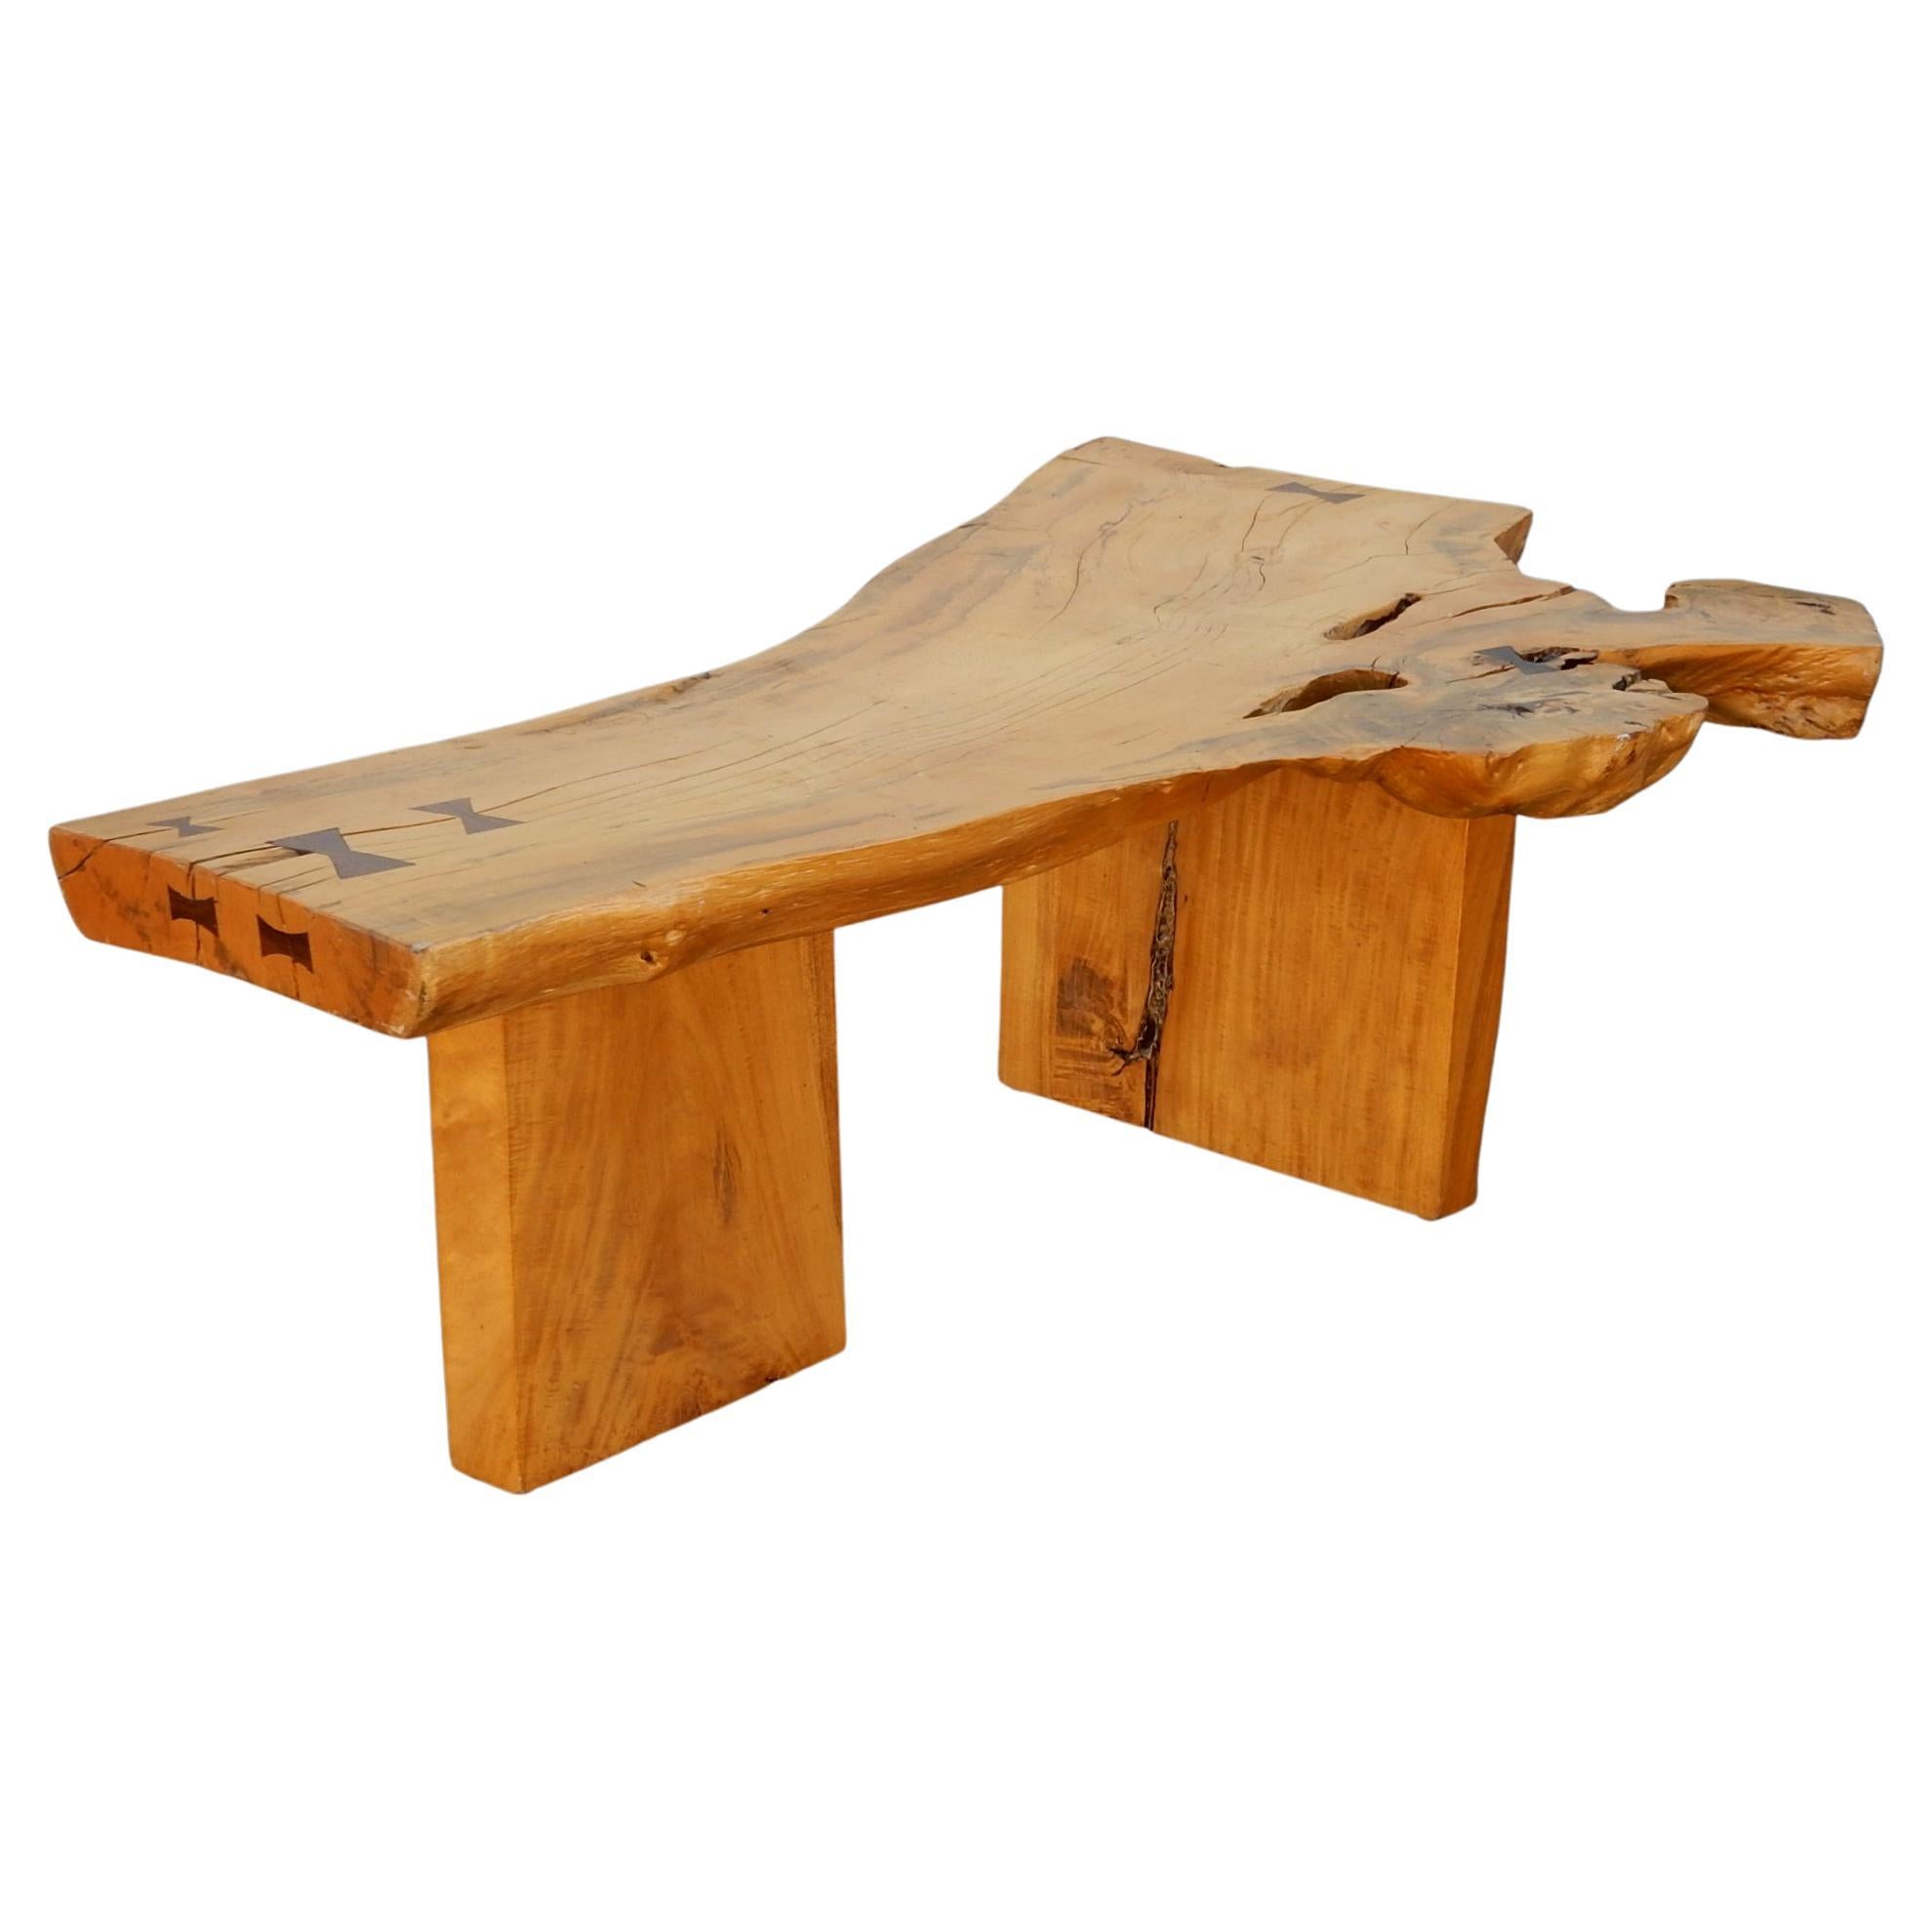 Organic Nakashima Style Live Edge Bowtie Slab Coffee Table, circa 1970 In Good Condition For Sale In Las Vegas, NV